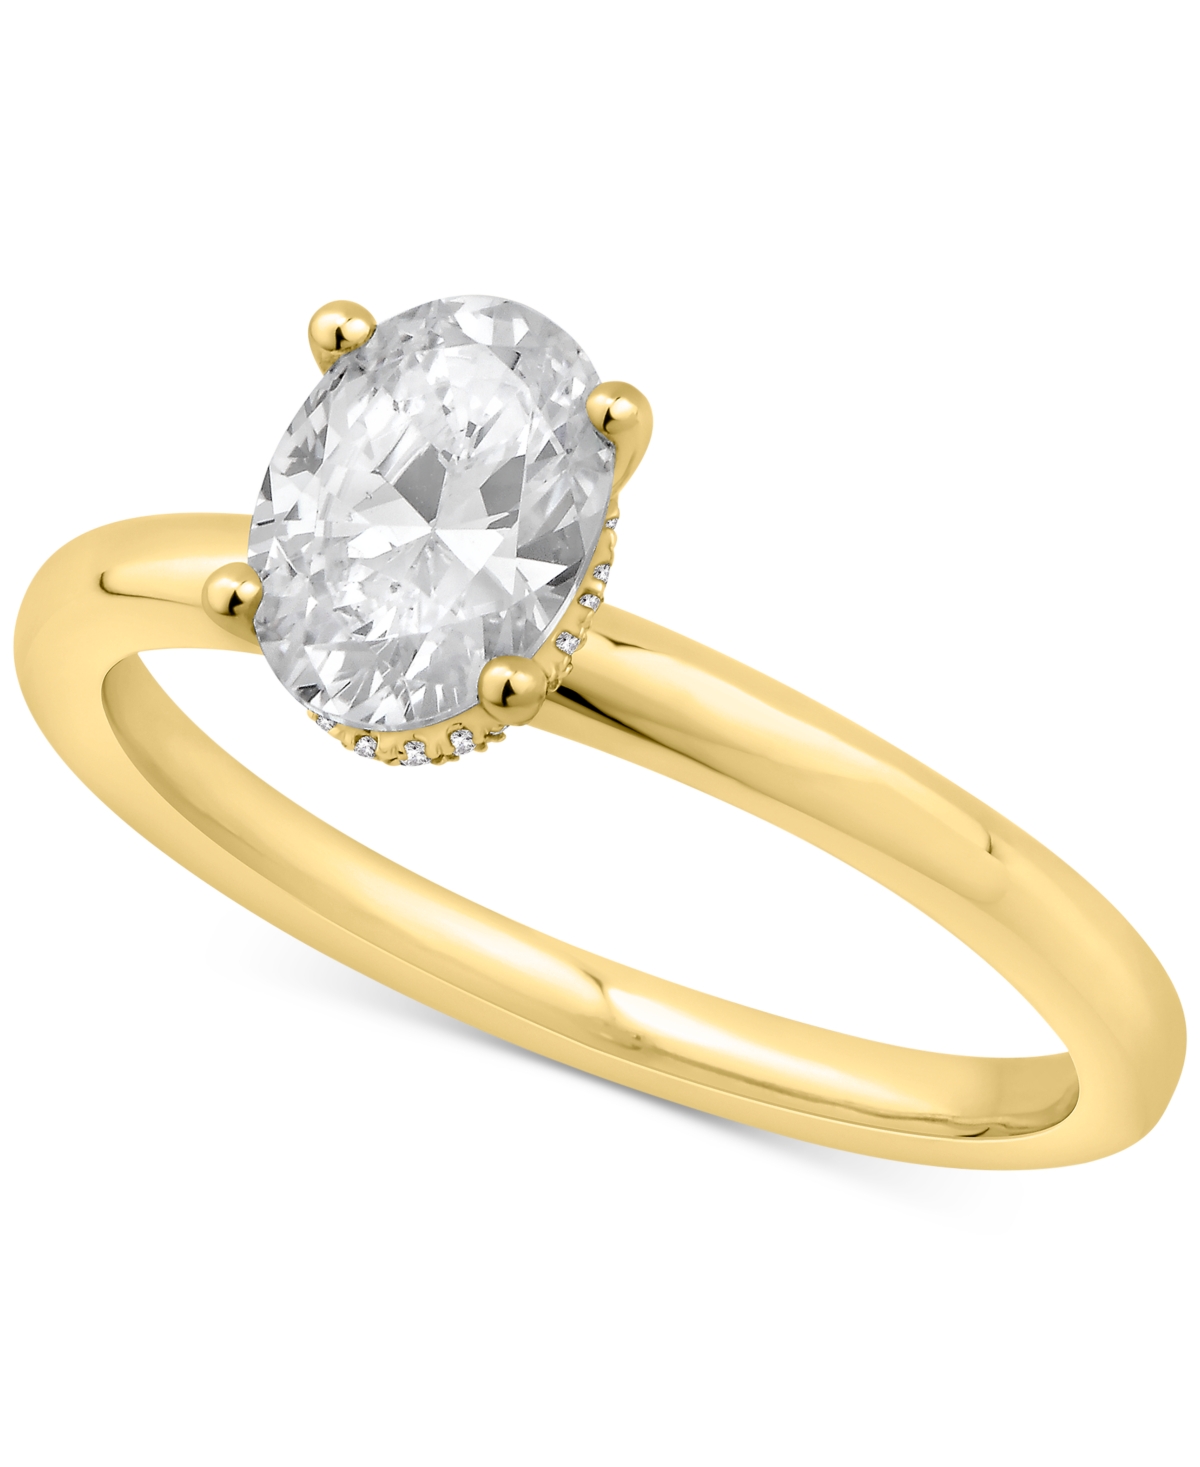 Gia Certified Diamond Oval Engagement Ring (1 ct. t.w.) in 14k Gold - Yellow Gold